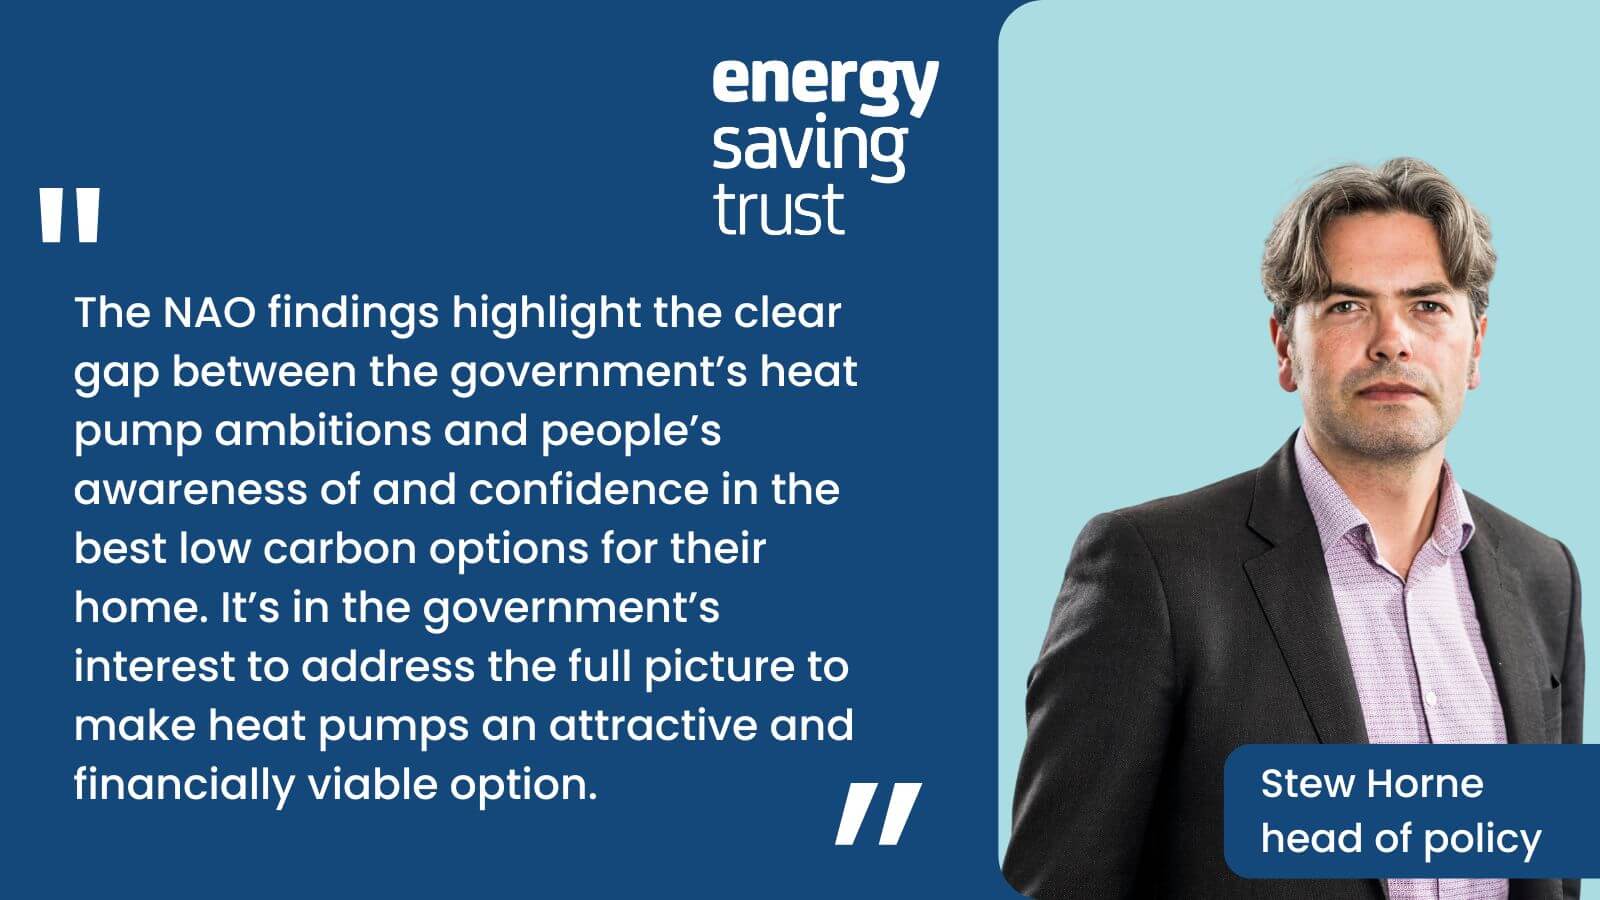 Stew Horne, head of policy at Energy Saving Trust, comments on the NAO decarbonisation report.